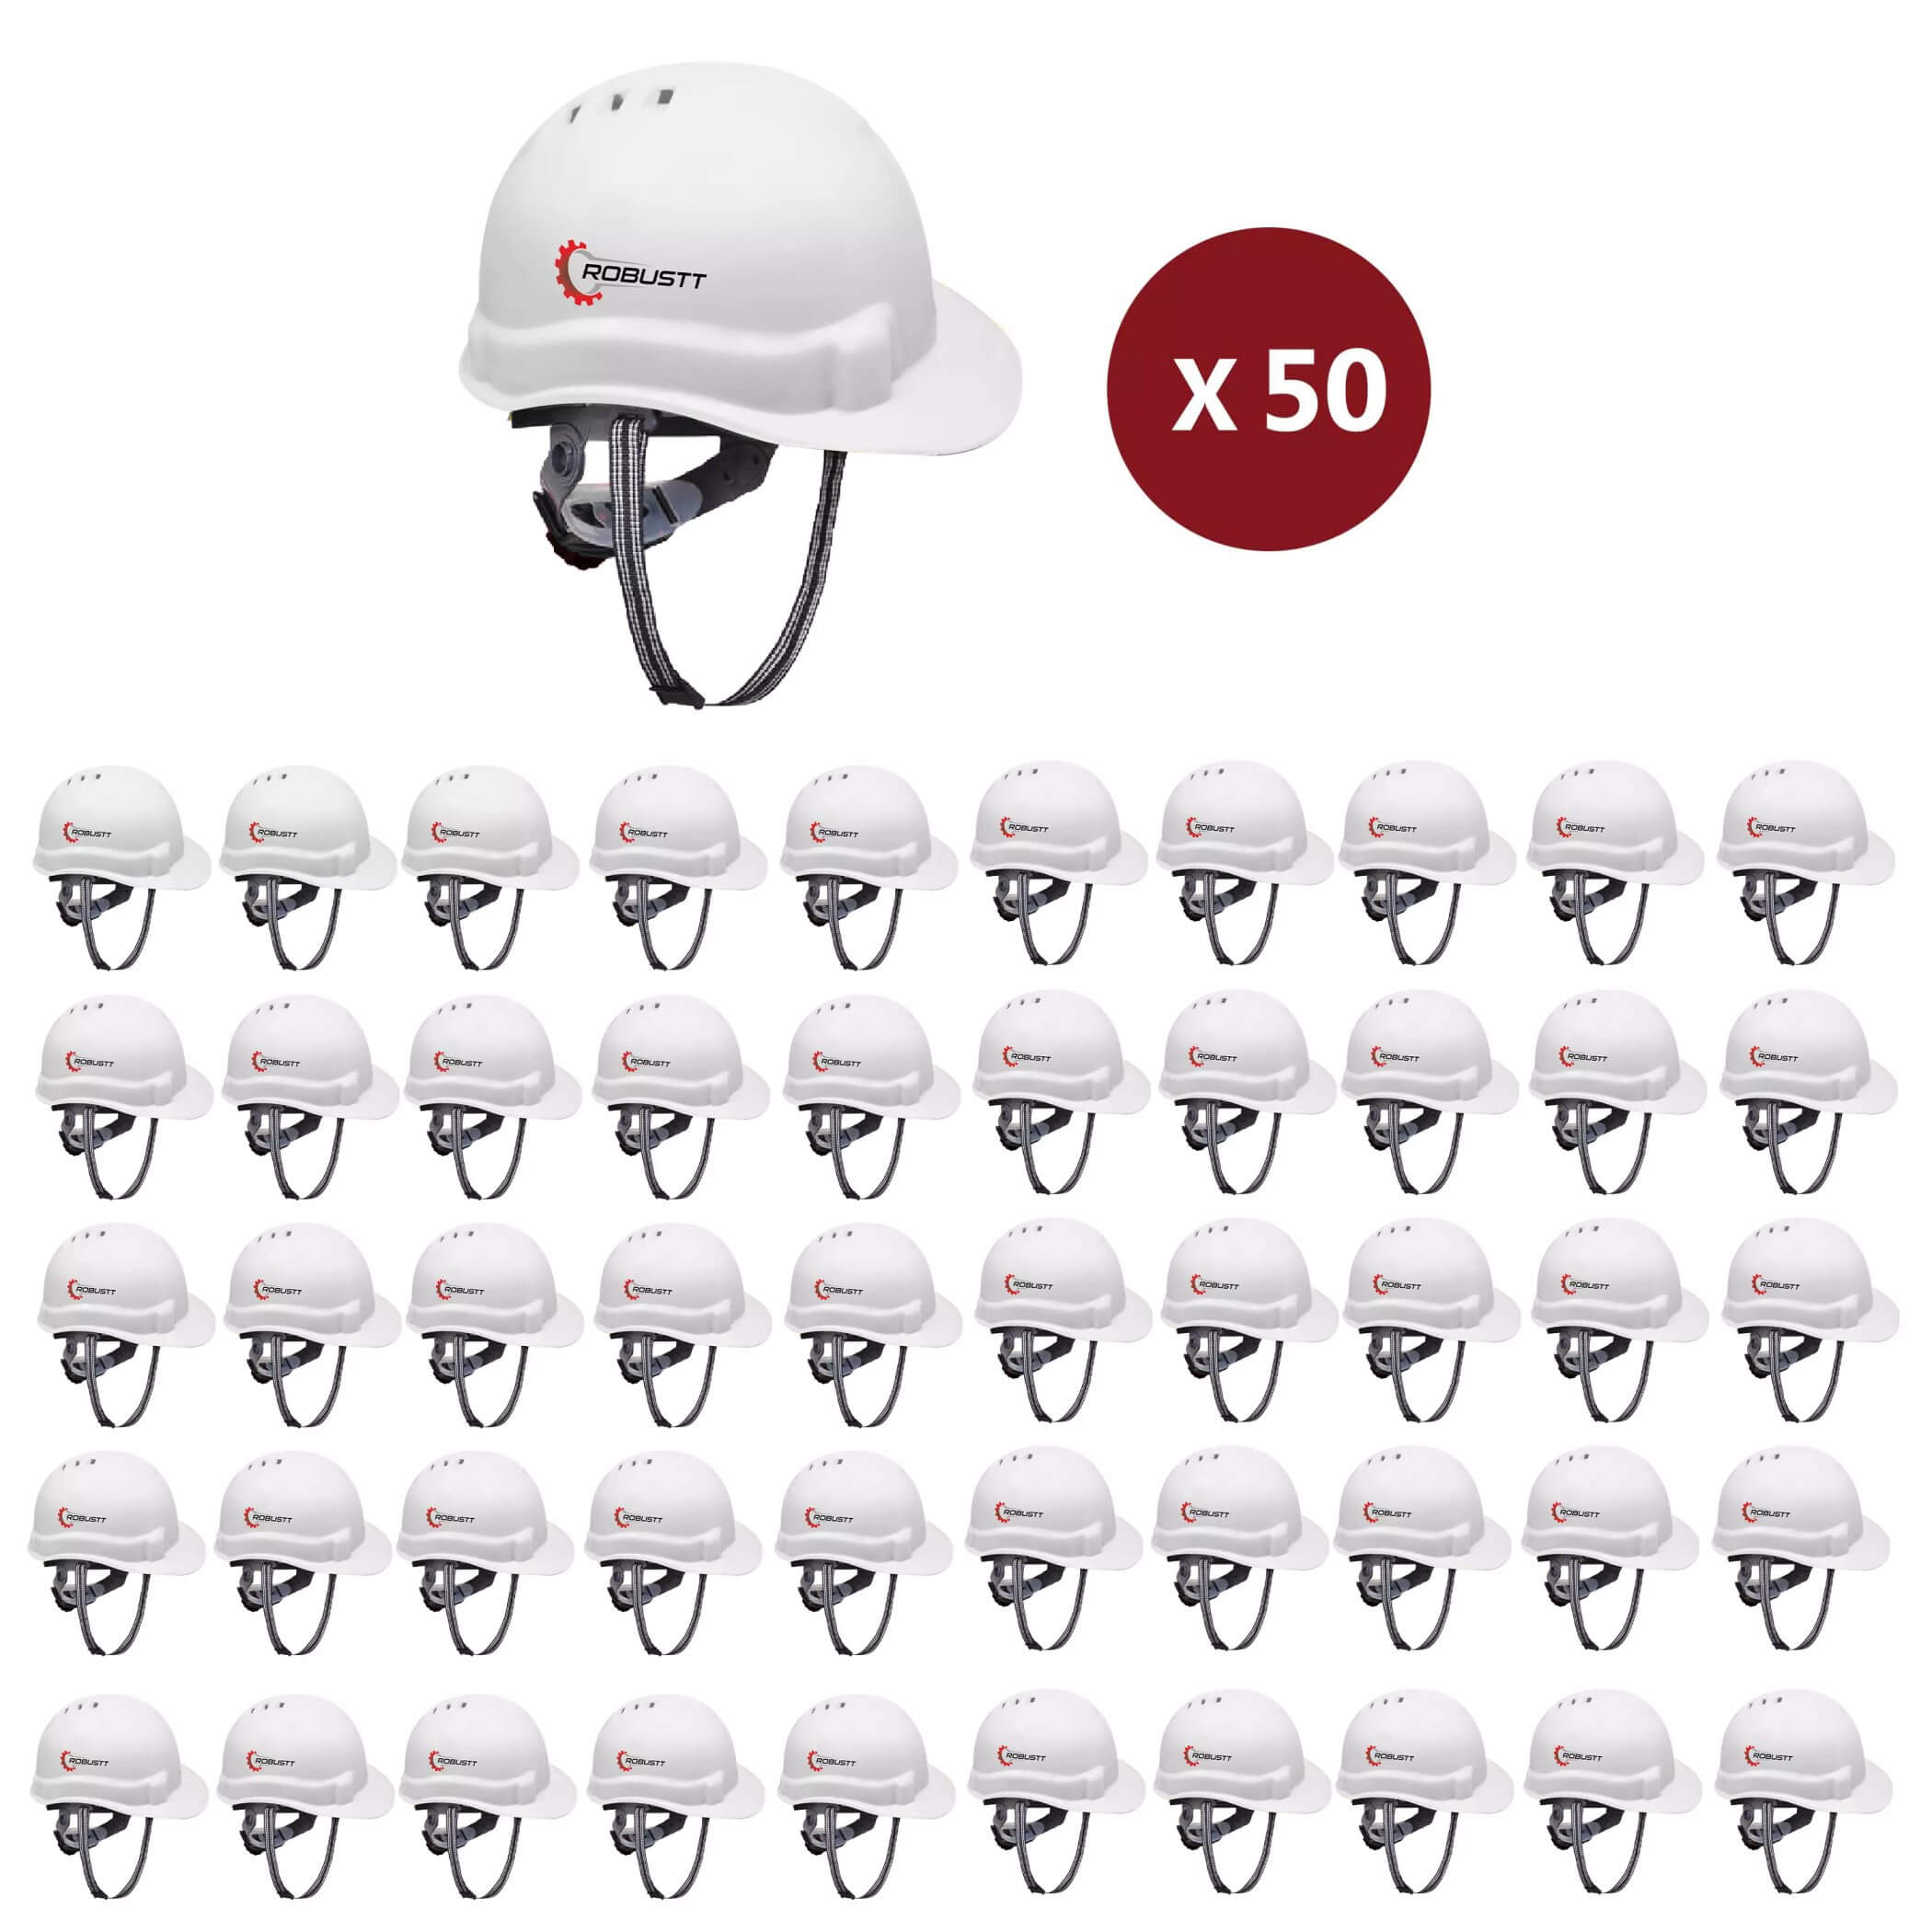 robustt-x-shree-jee-safety-helmet-executive-ratchet-type-adjustment-protection-for-outdoor-work-head-safety-hat-with-sweat-band-white-pack-of-50